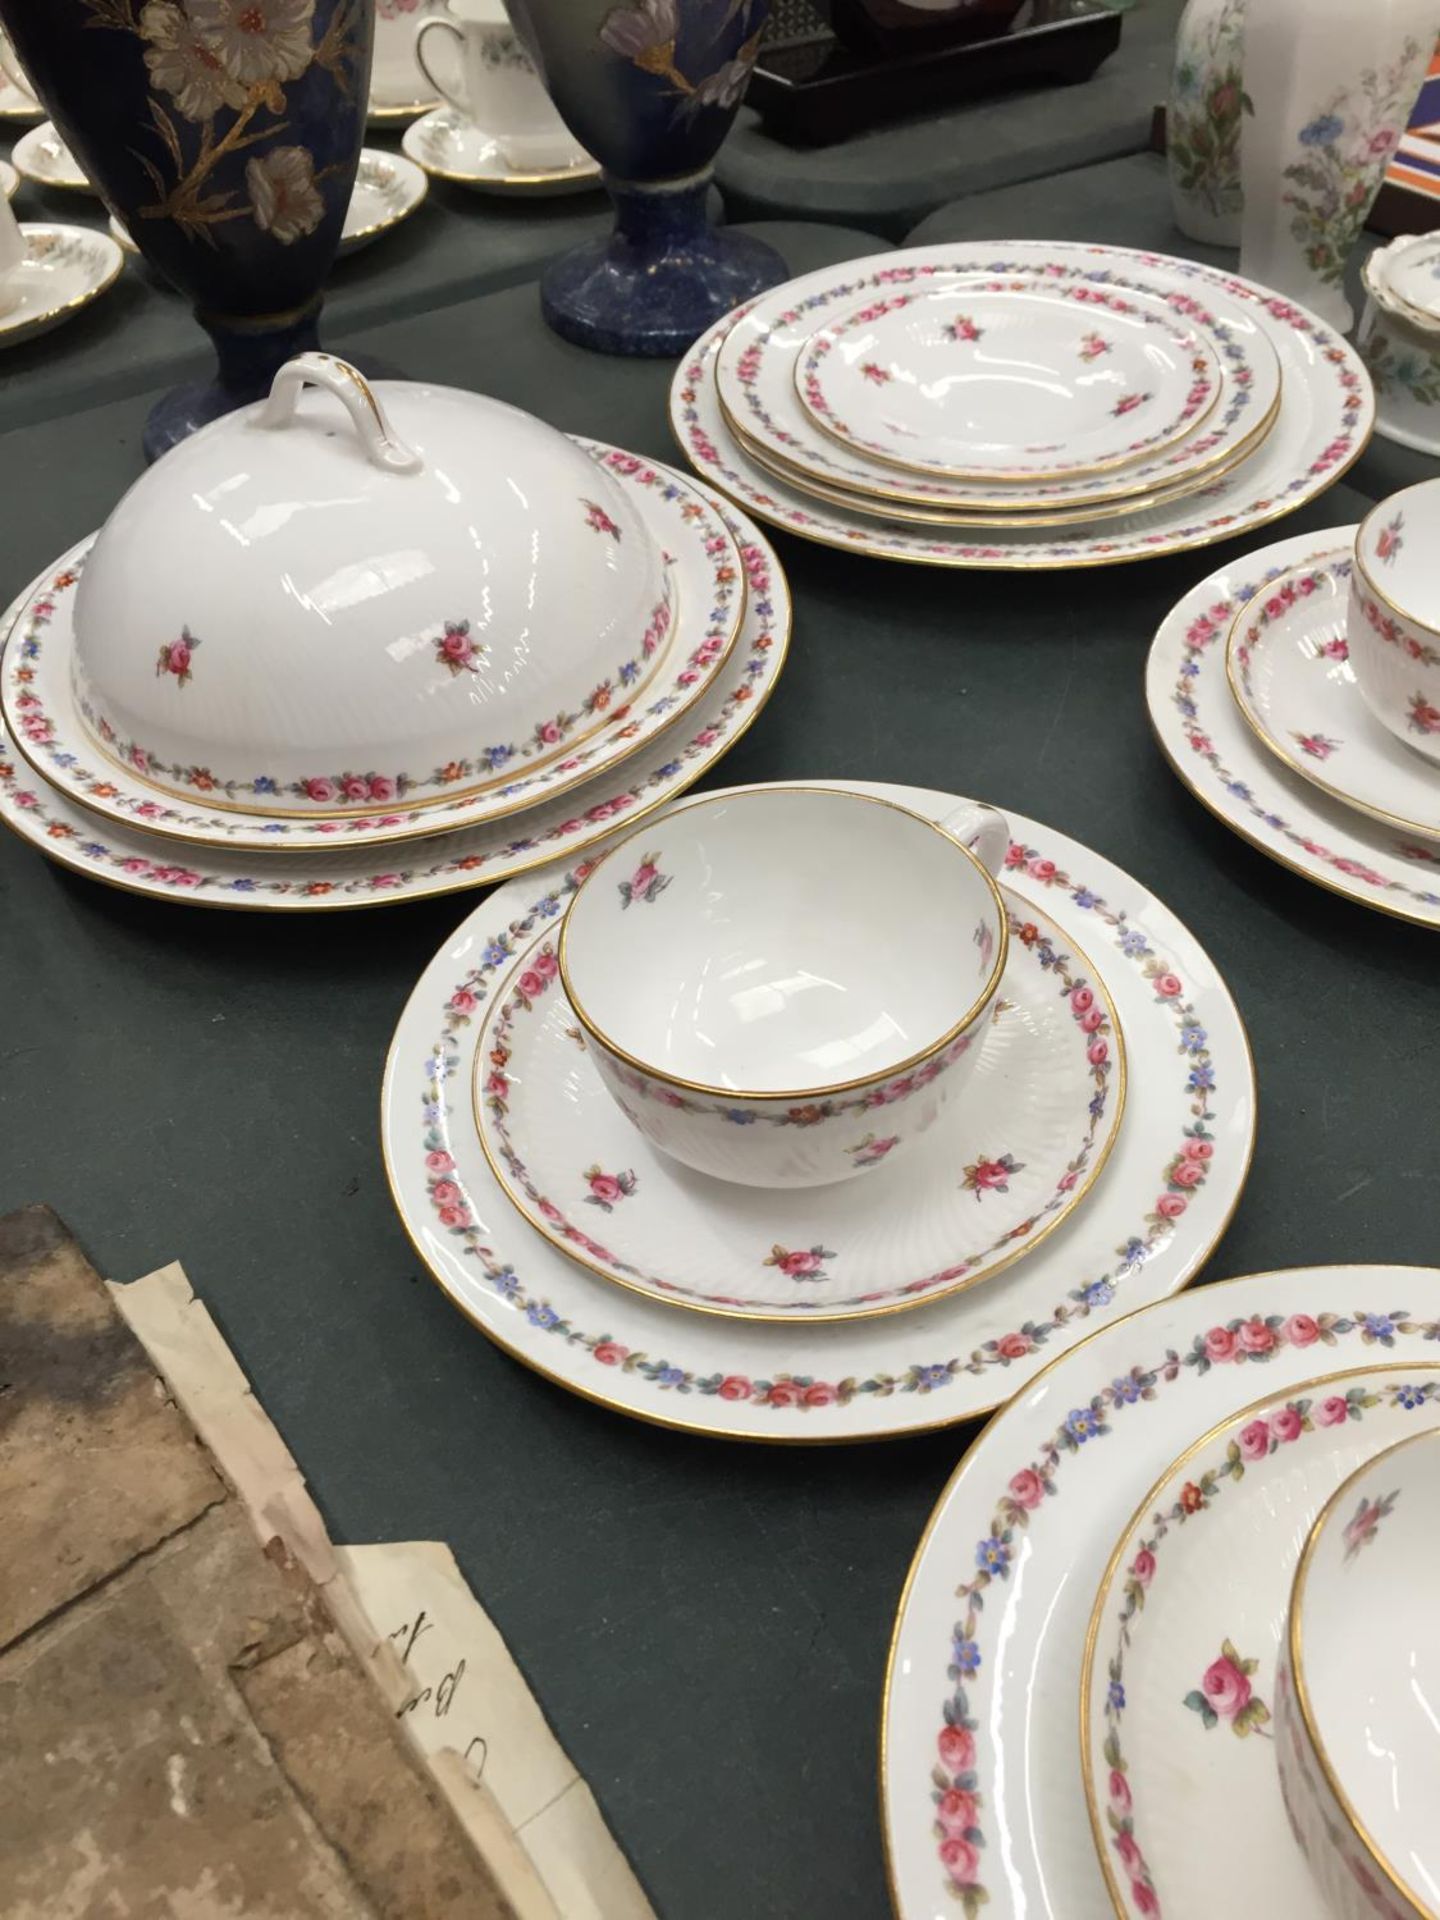 A QUANTITY OF 19TH CENTURY COPELAND SPODE CUPS, SAUCERS AND PLATES PLUS A MUFFIN DISH WITH CABBAGE - Image 4 of 4